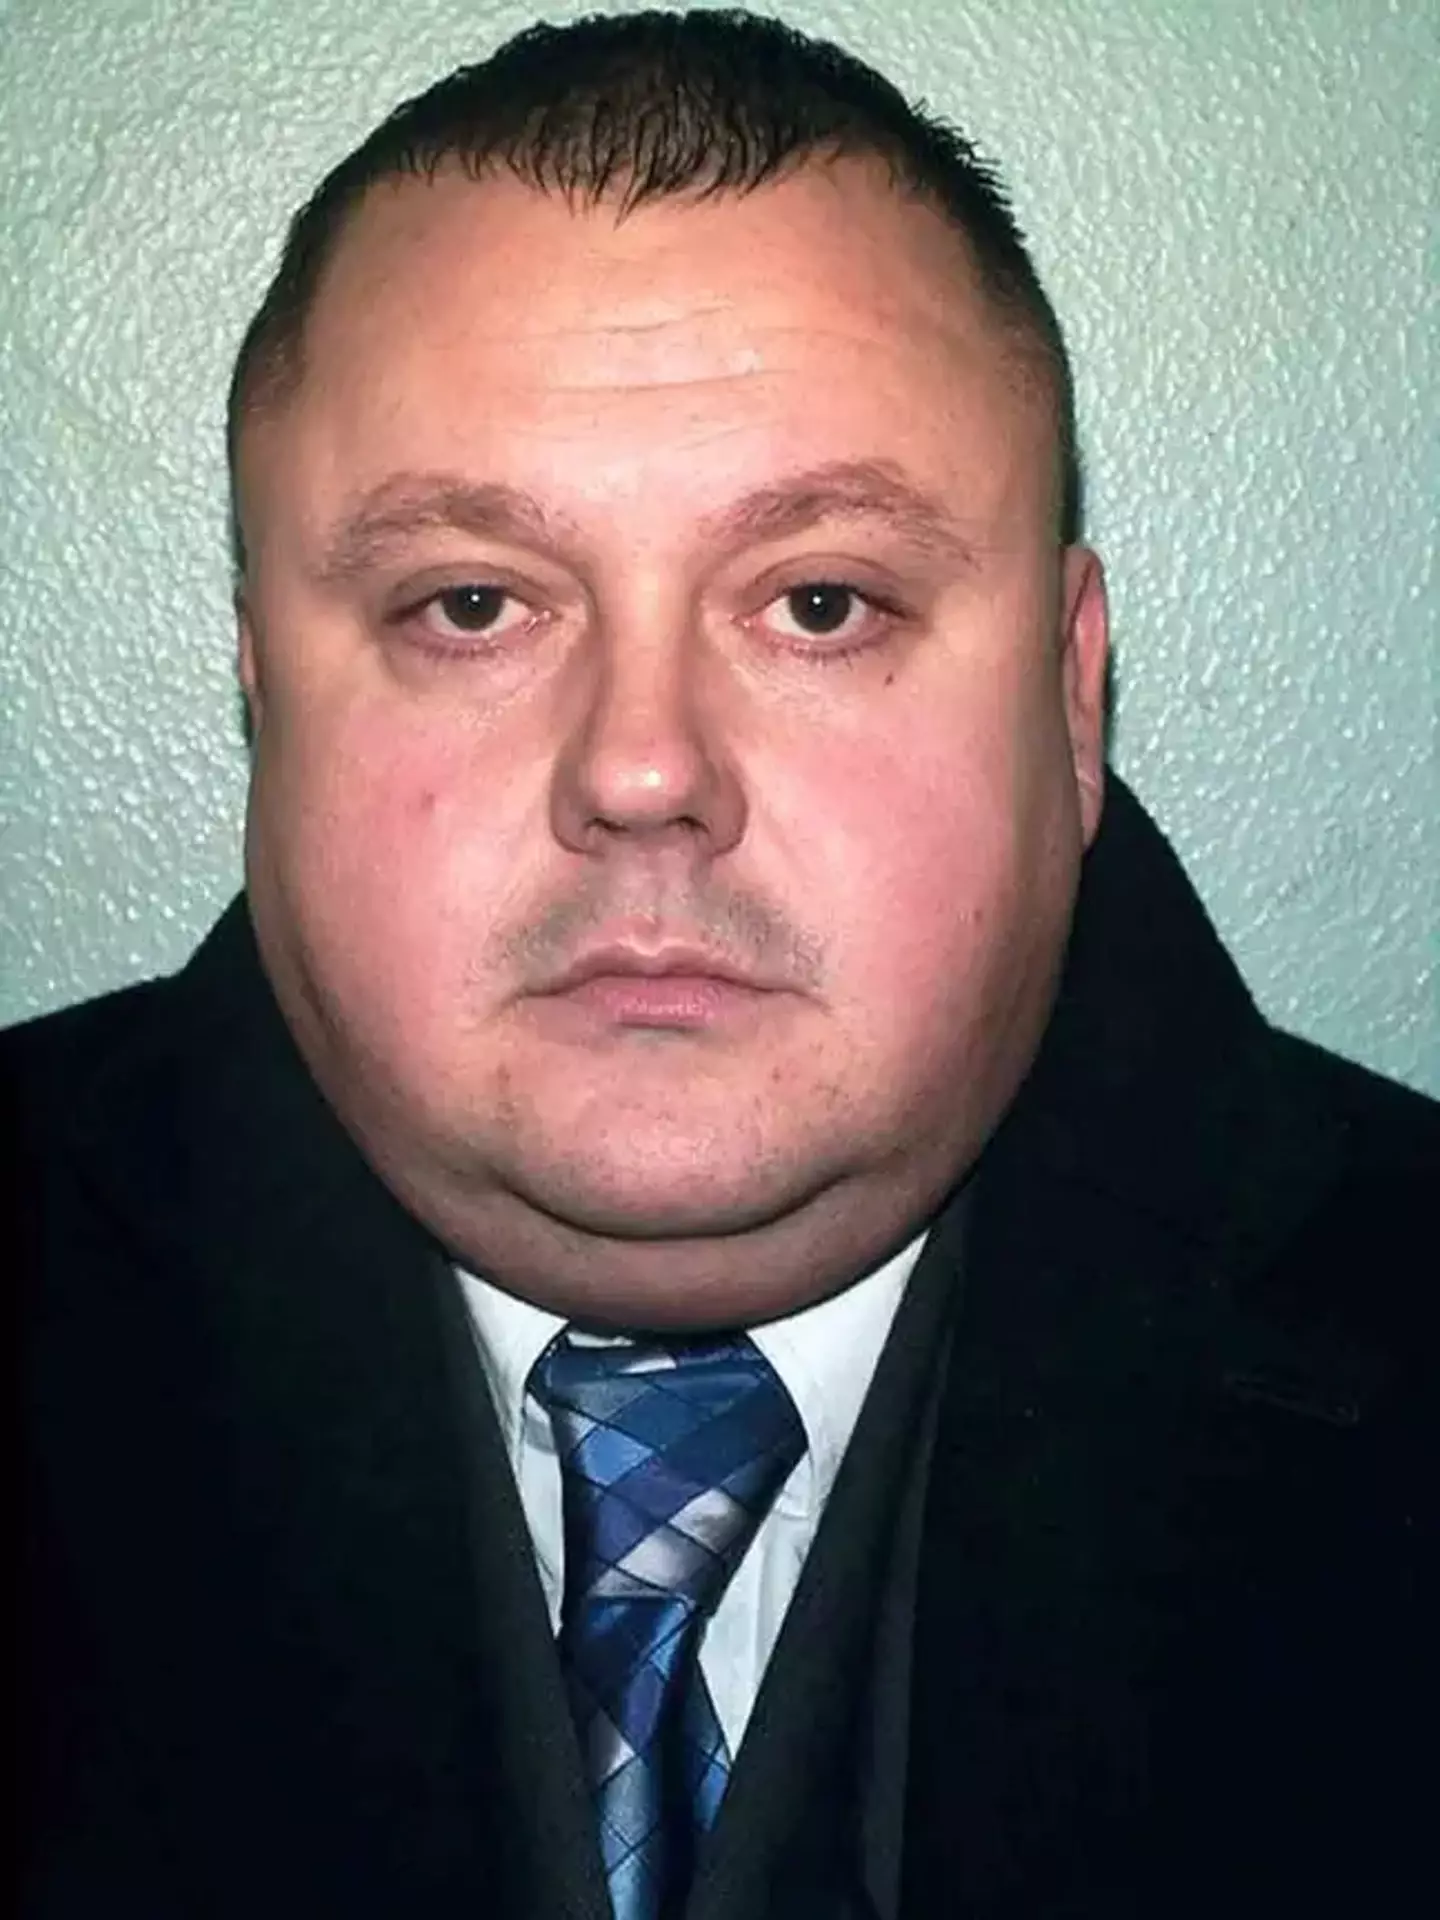 Serial killer Levi Bellfield is now engaged.